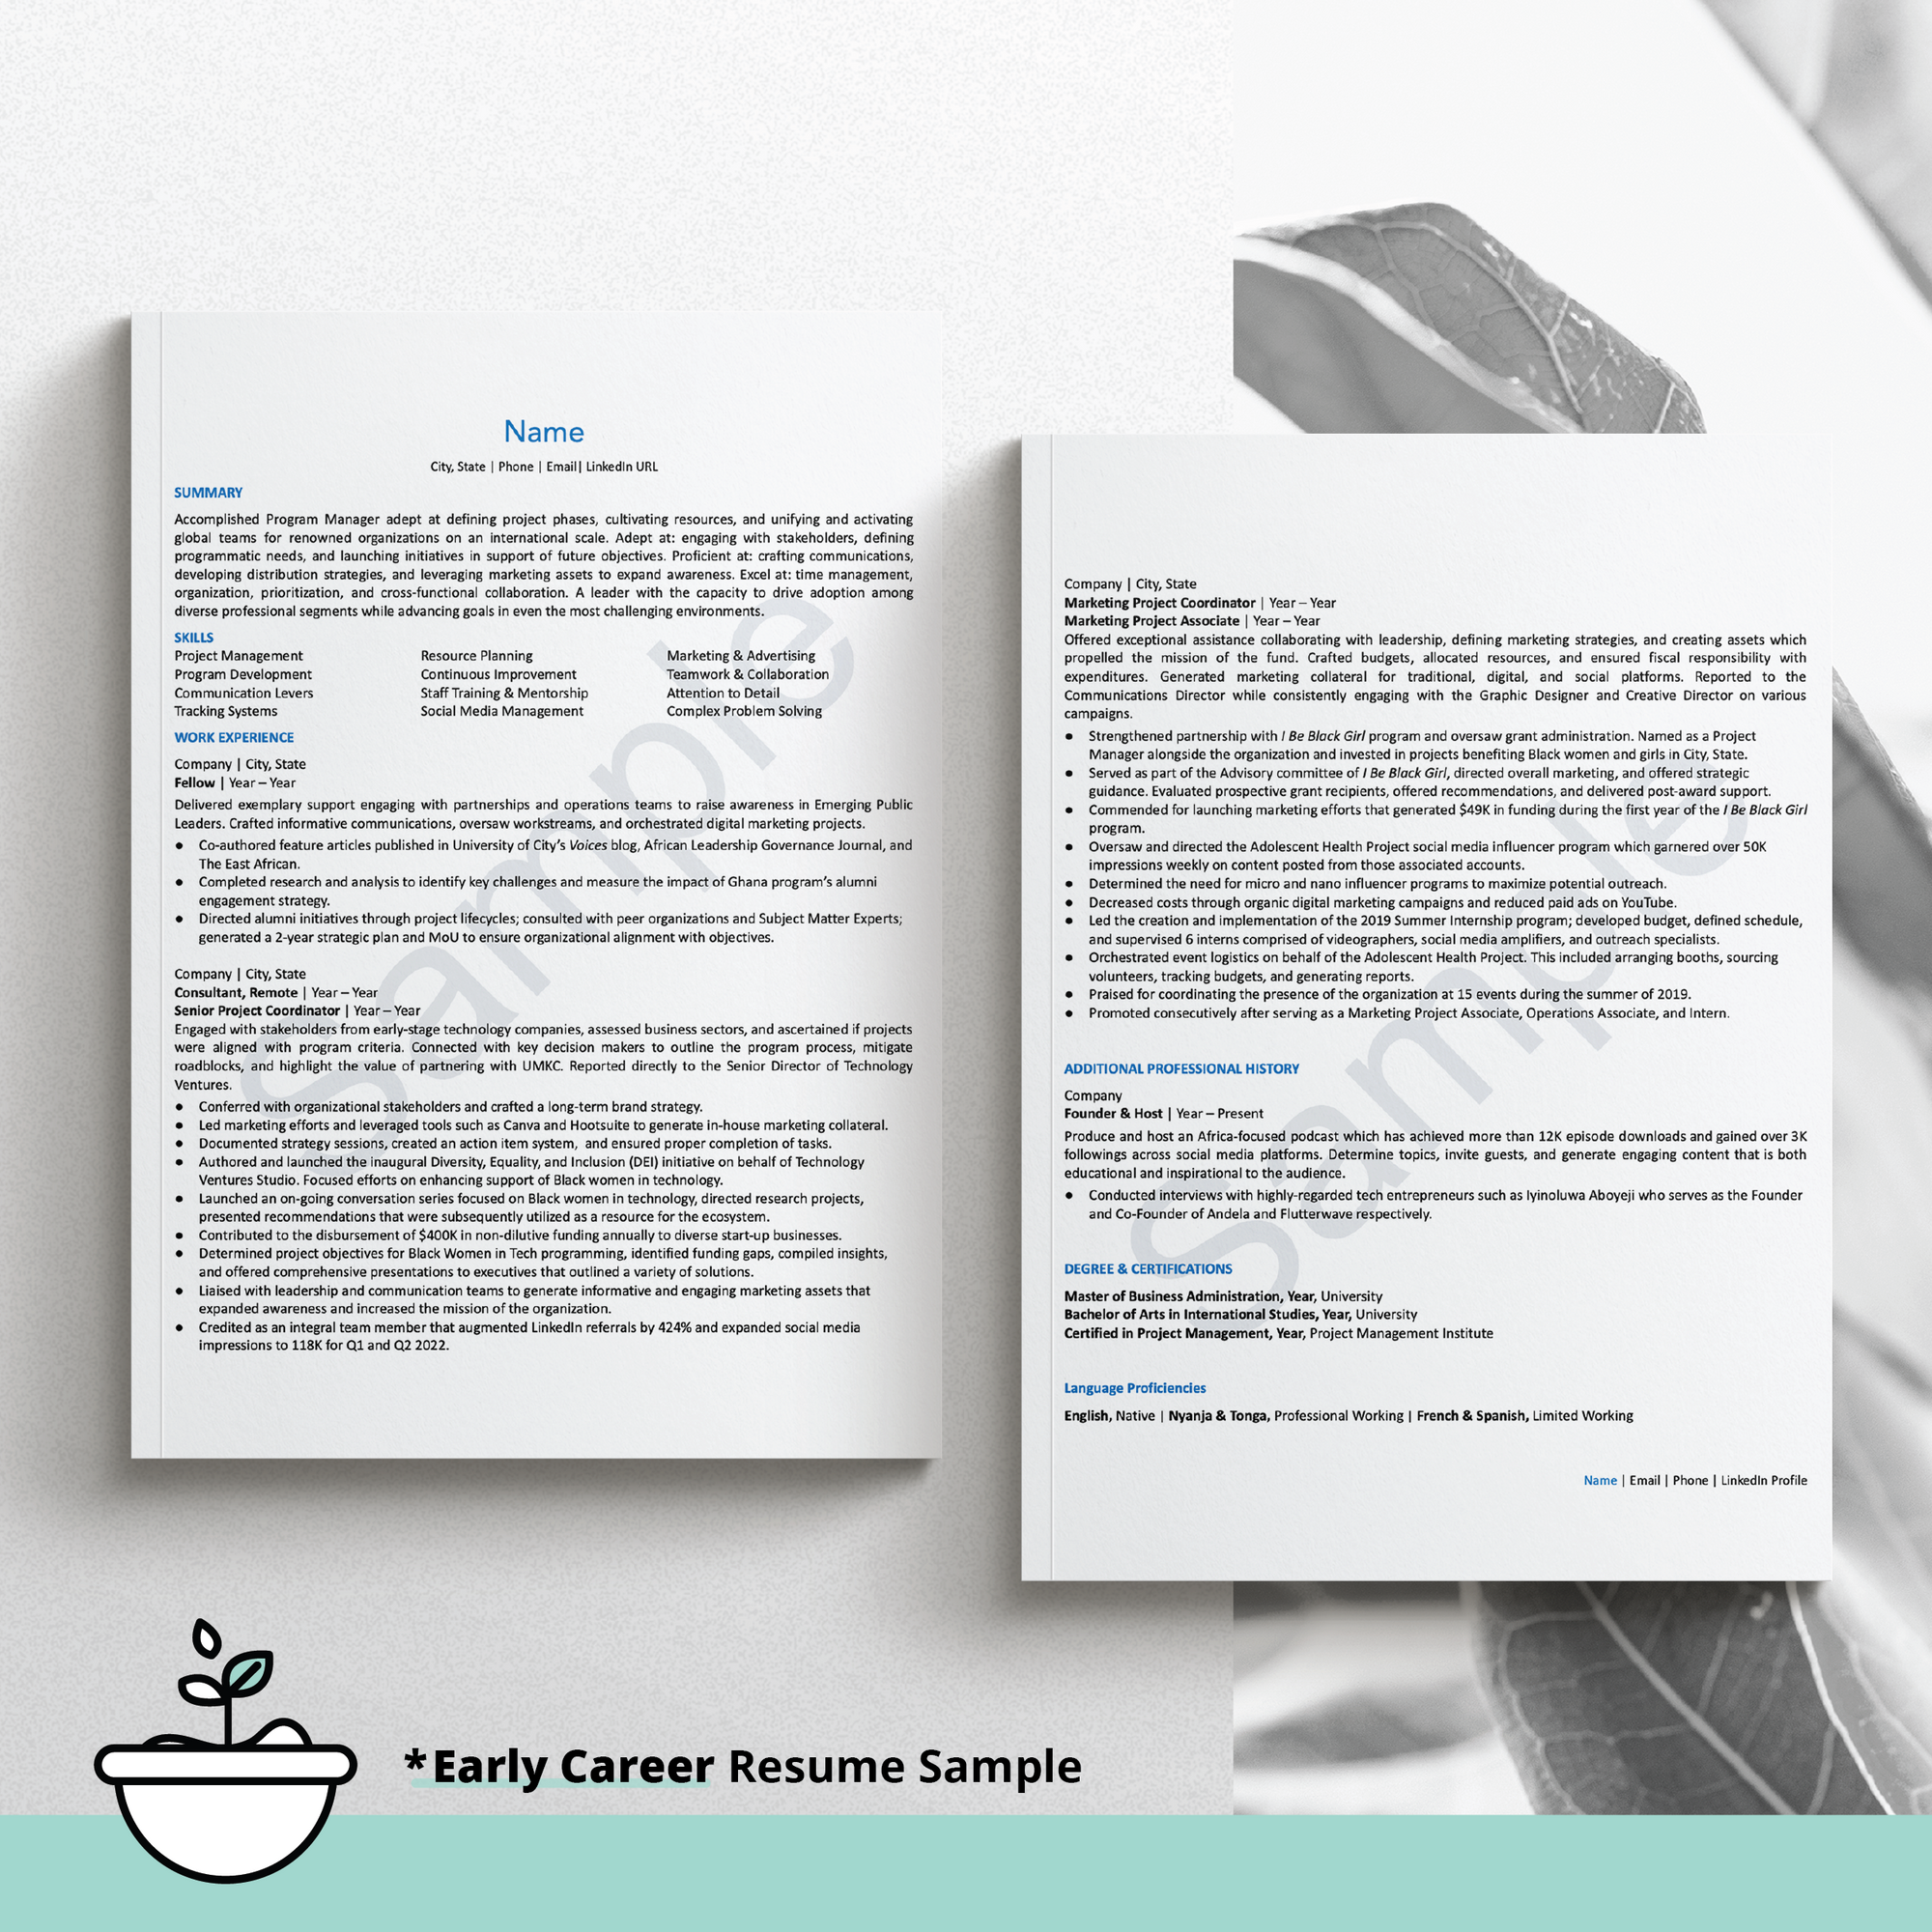 2 pages of a early career resume sample on a black and white background with botanicals and a light teal border at the bottom